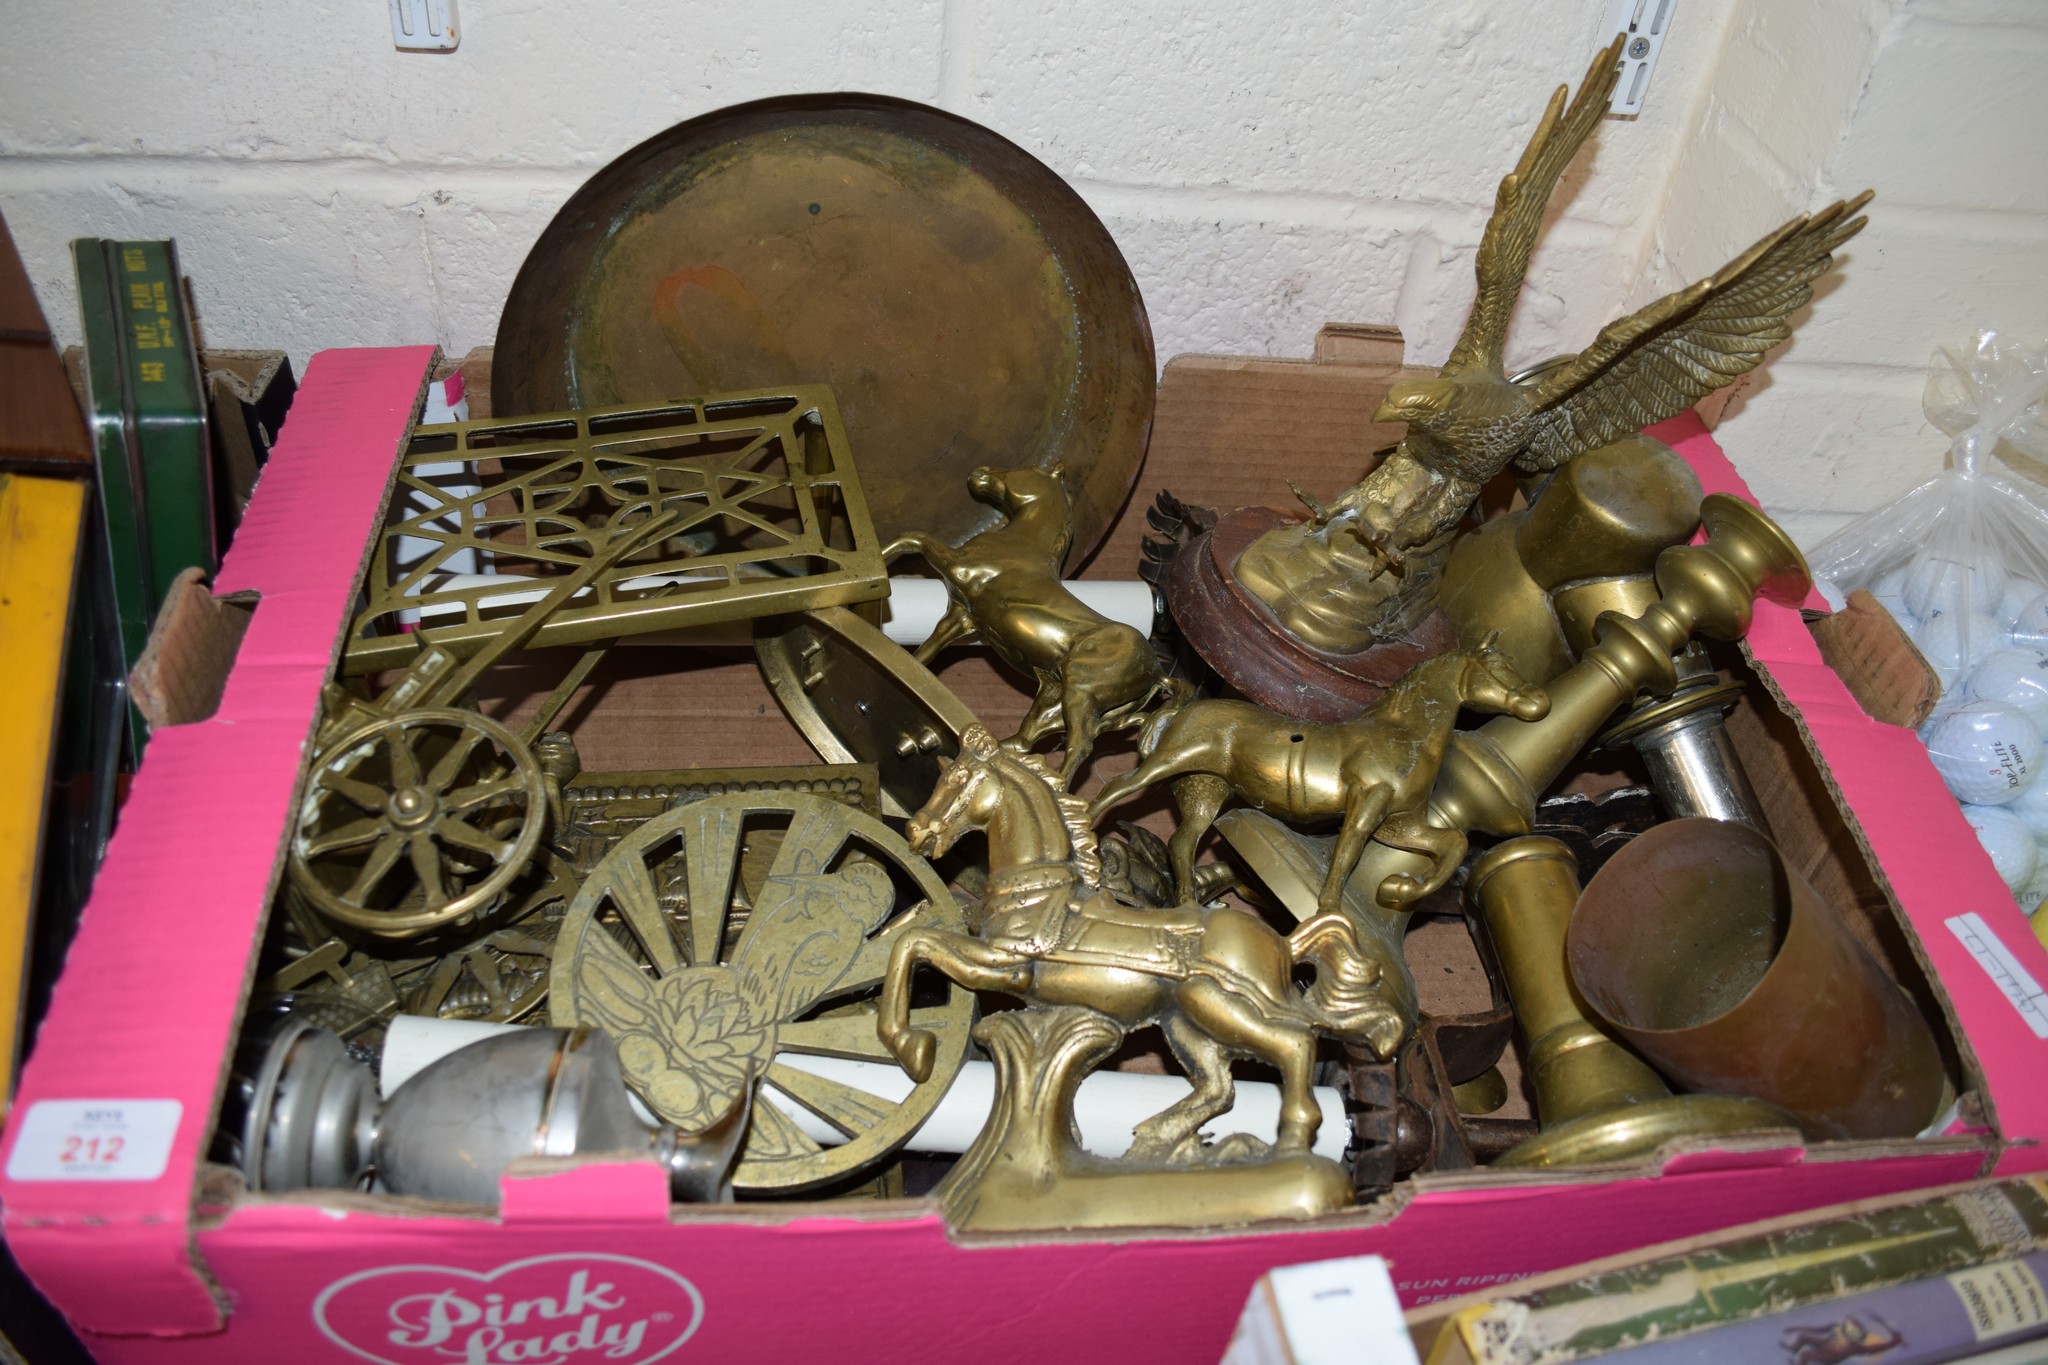 BOX CONTAINING BRASS WARES INCLUDING MODELS OF HORSES AND AN EAGLE AND SOME OLD BRASS SHELL CASES